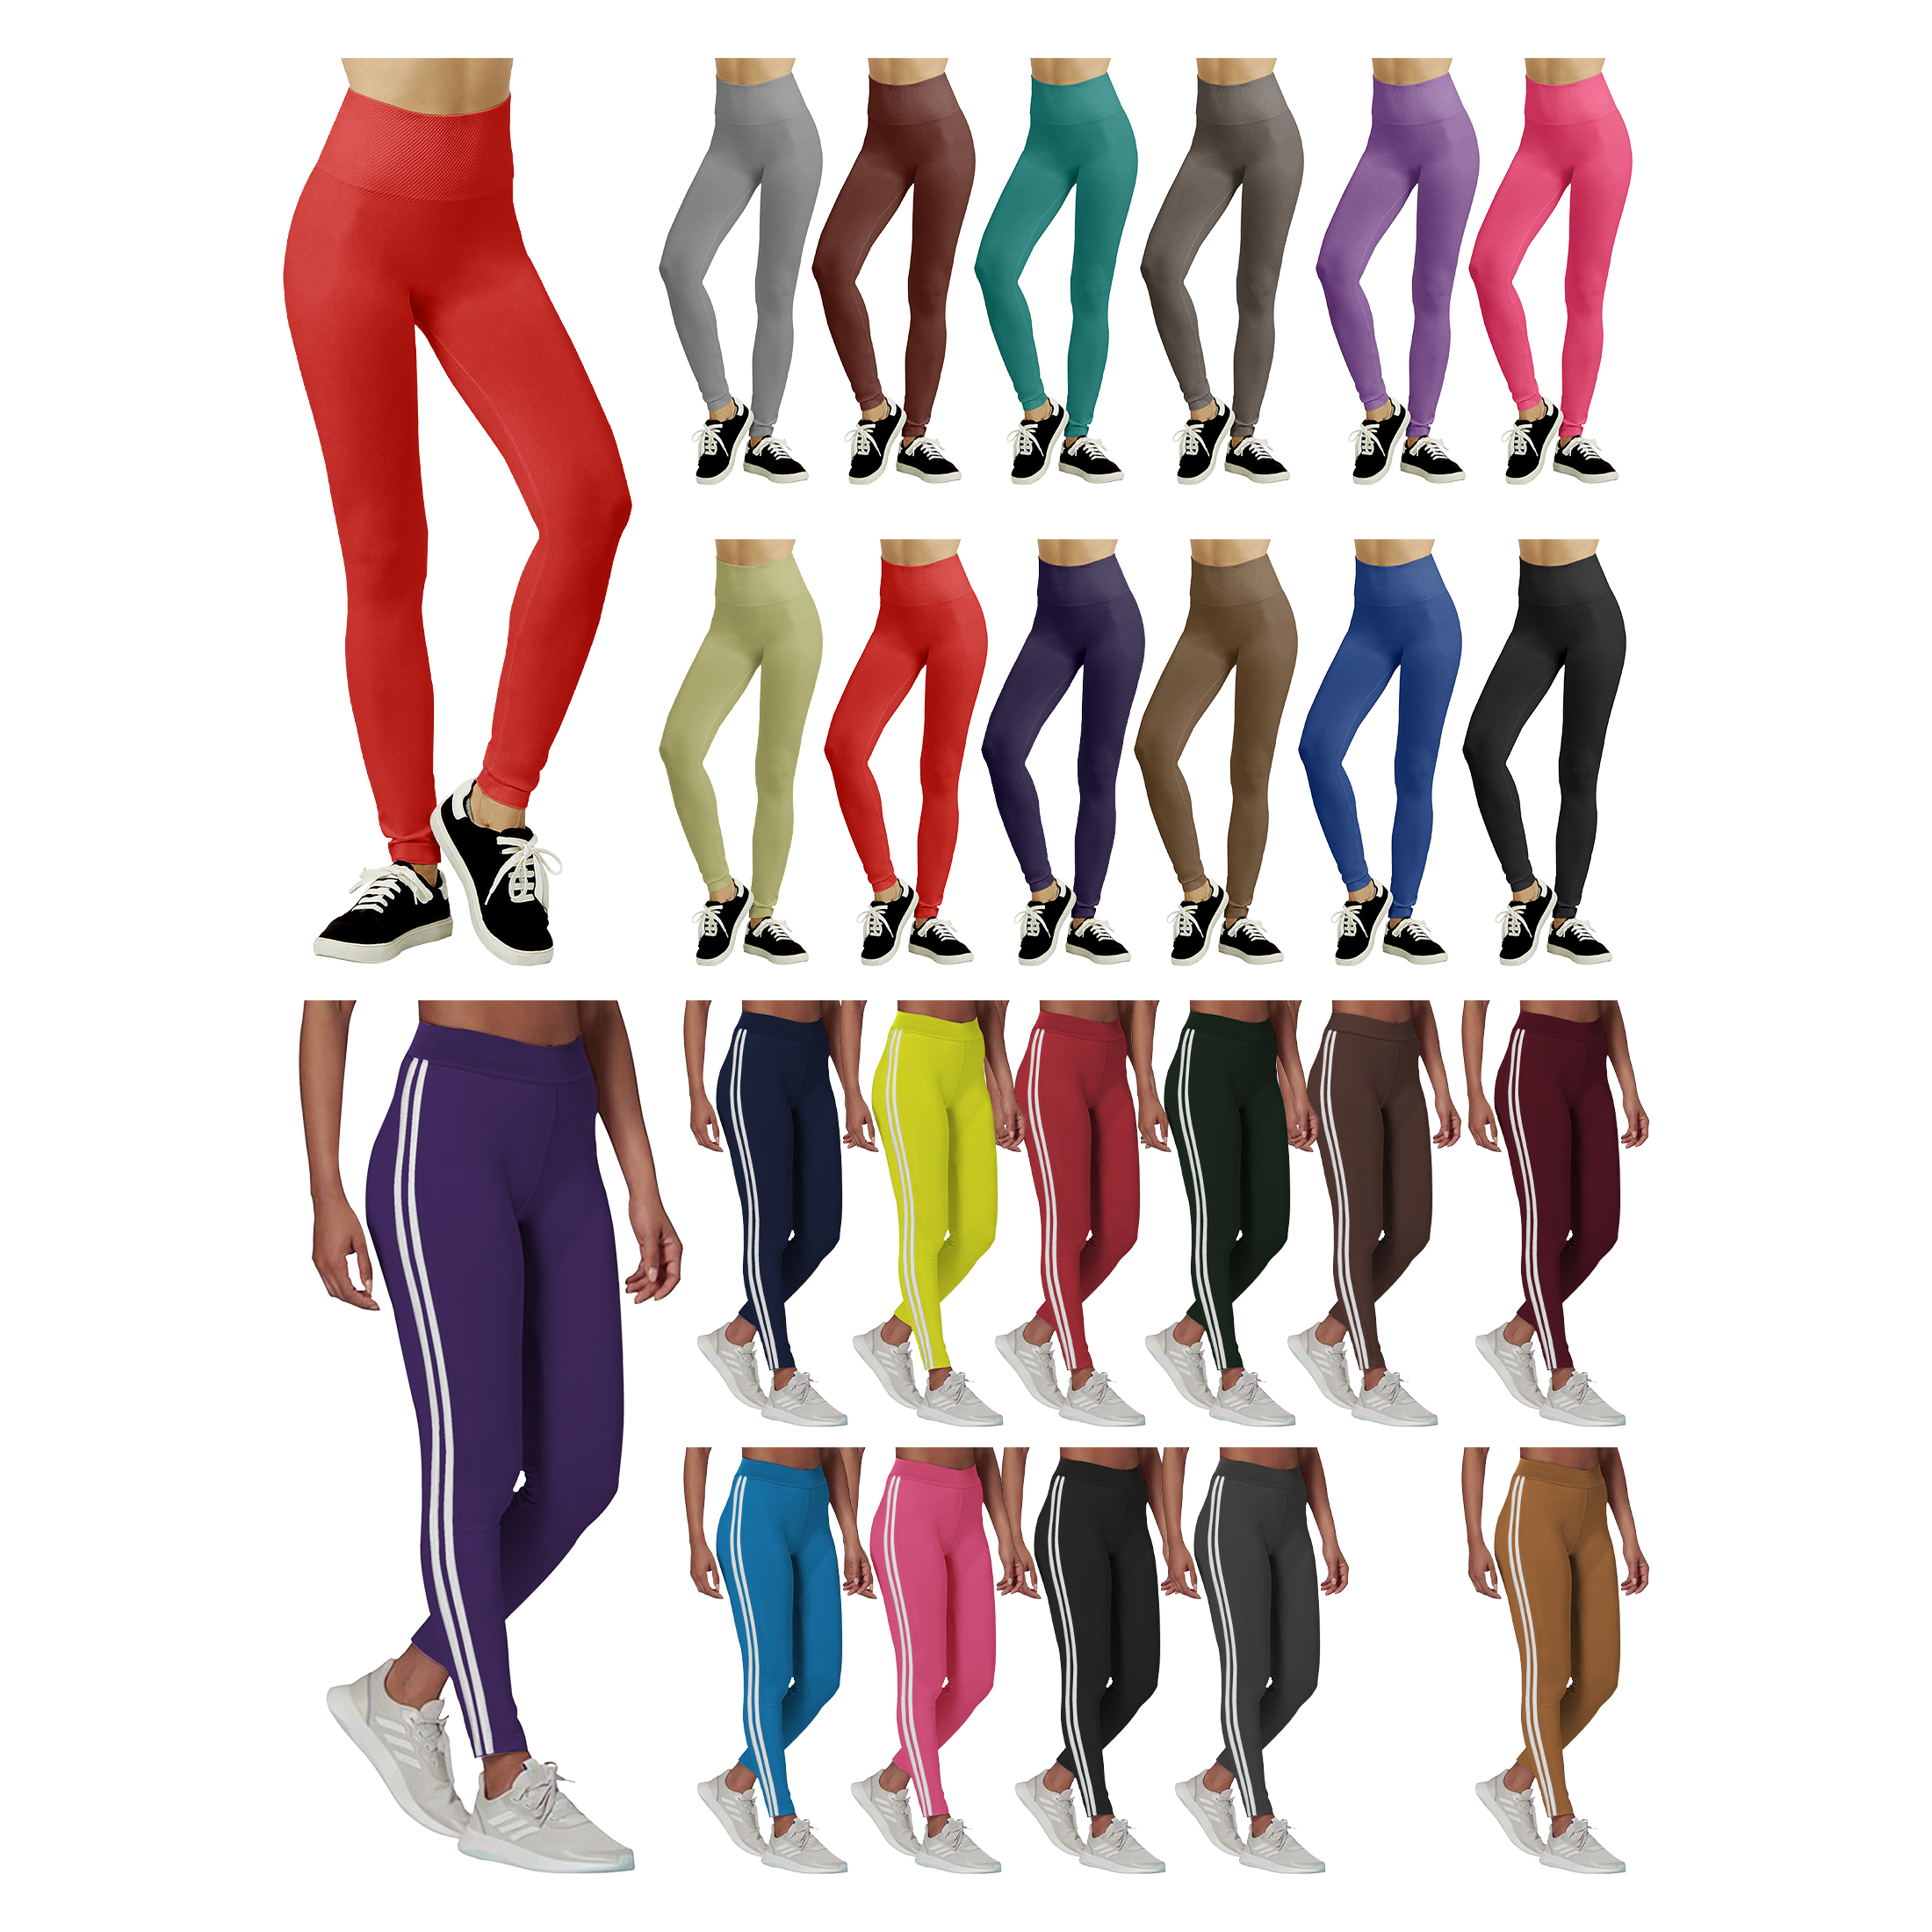 5-Pack Women's Fleece-Lined High Waisted Workout Yoga Leggings - Solid & Stripes, L/XL